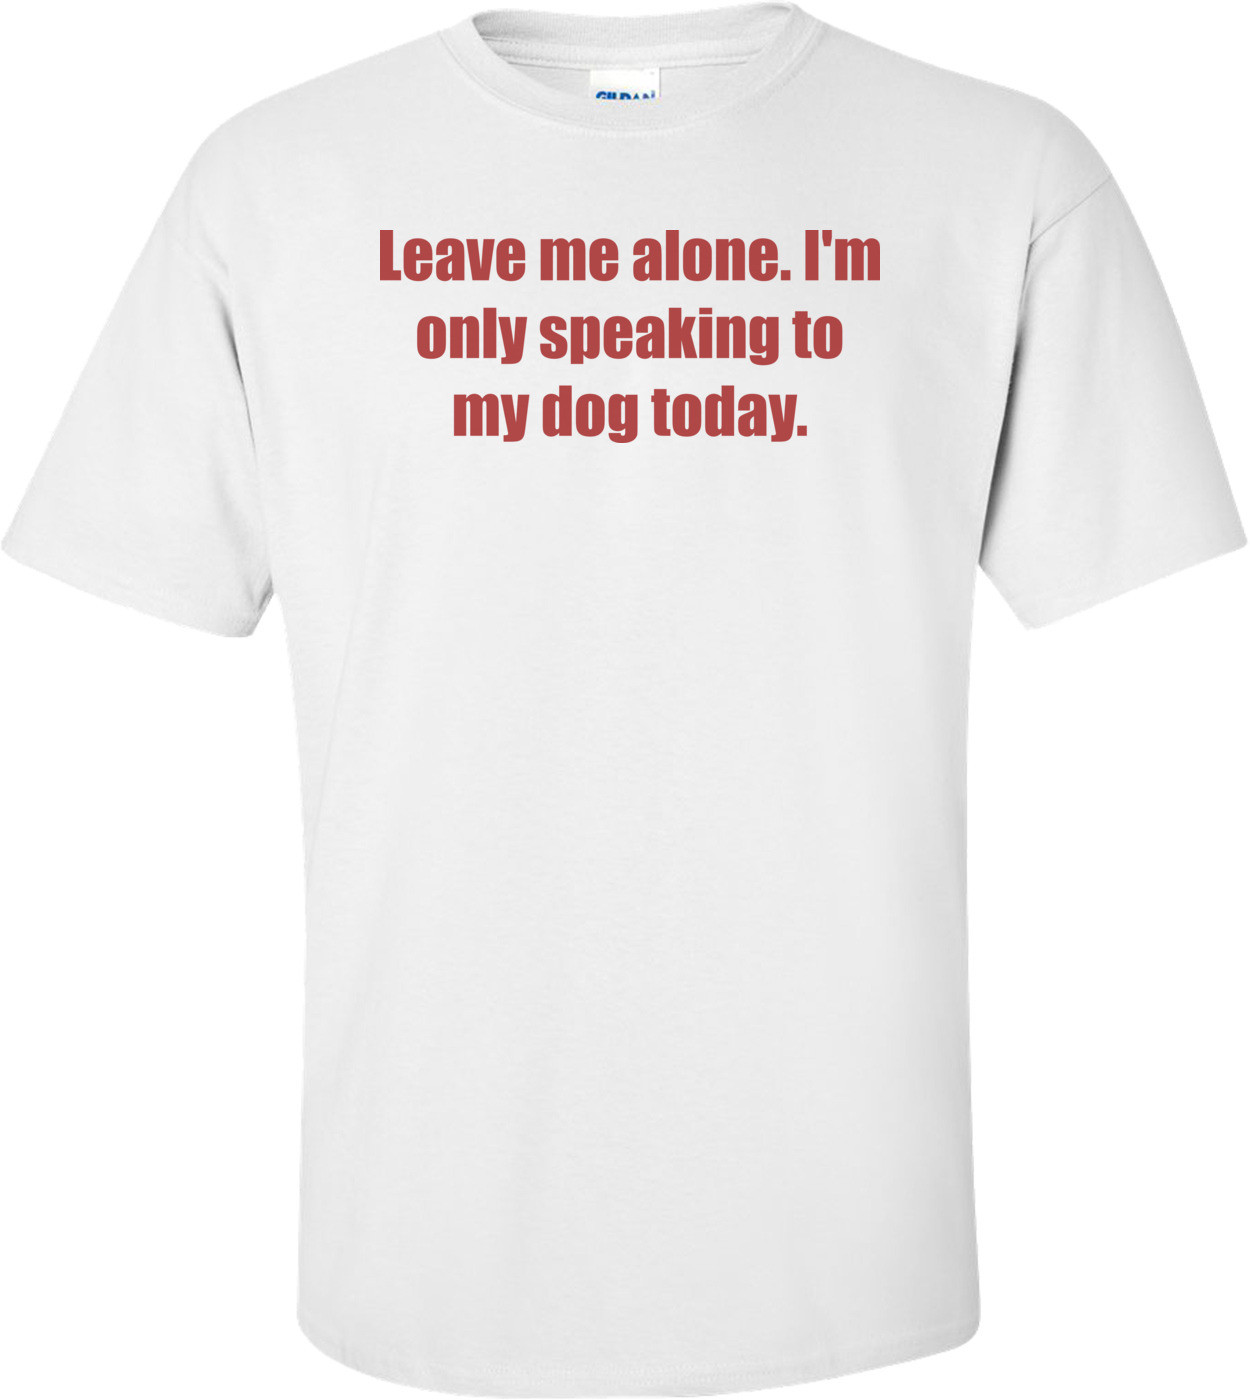 Leave Me Alone. I'm Only Speaking To My Dog Today. Shirt